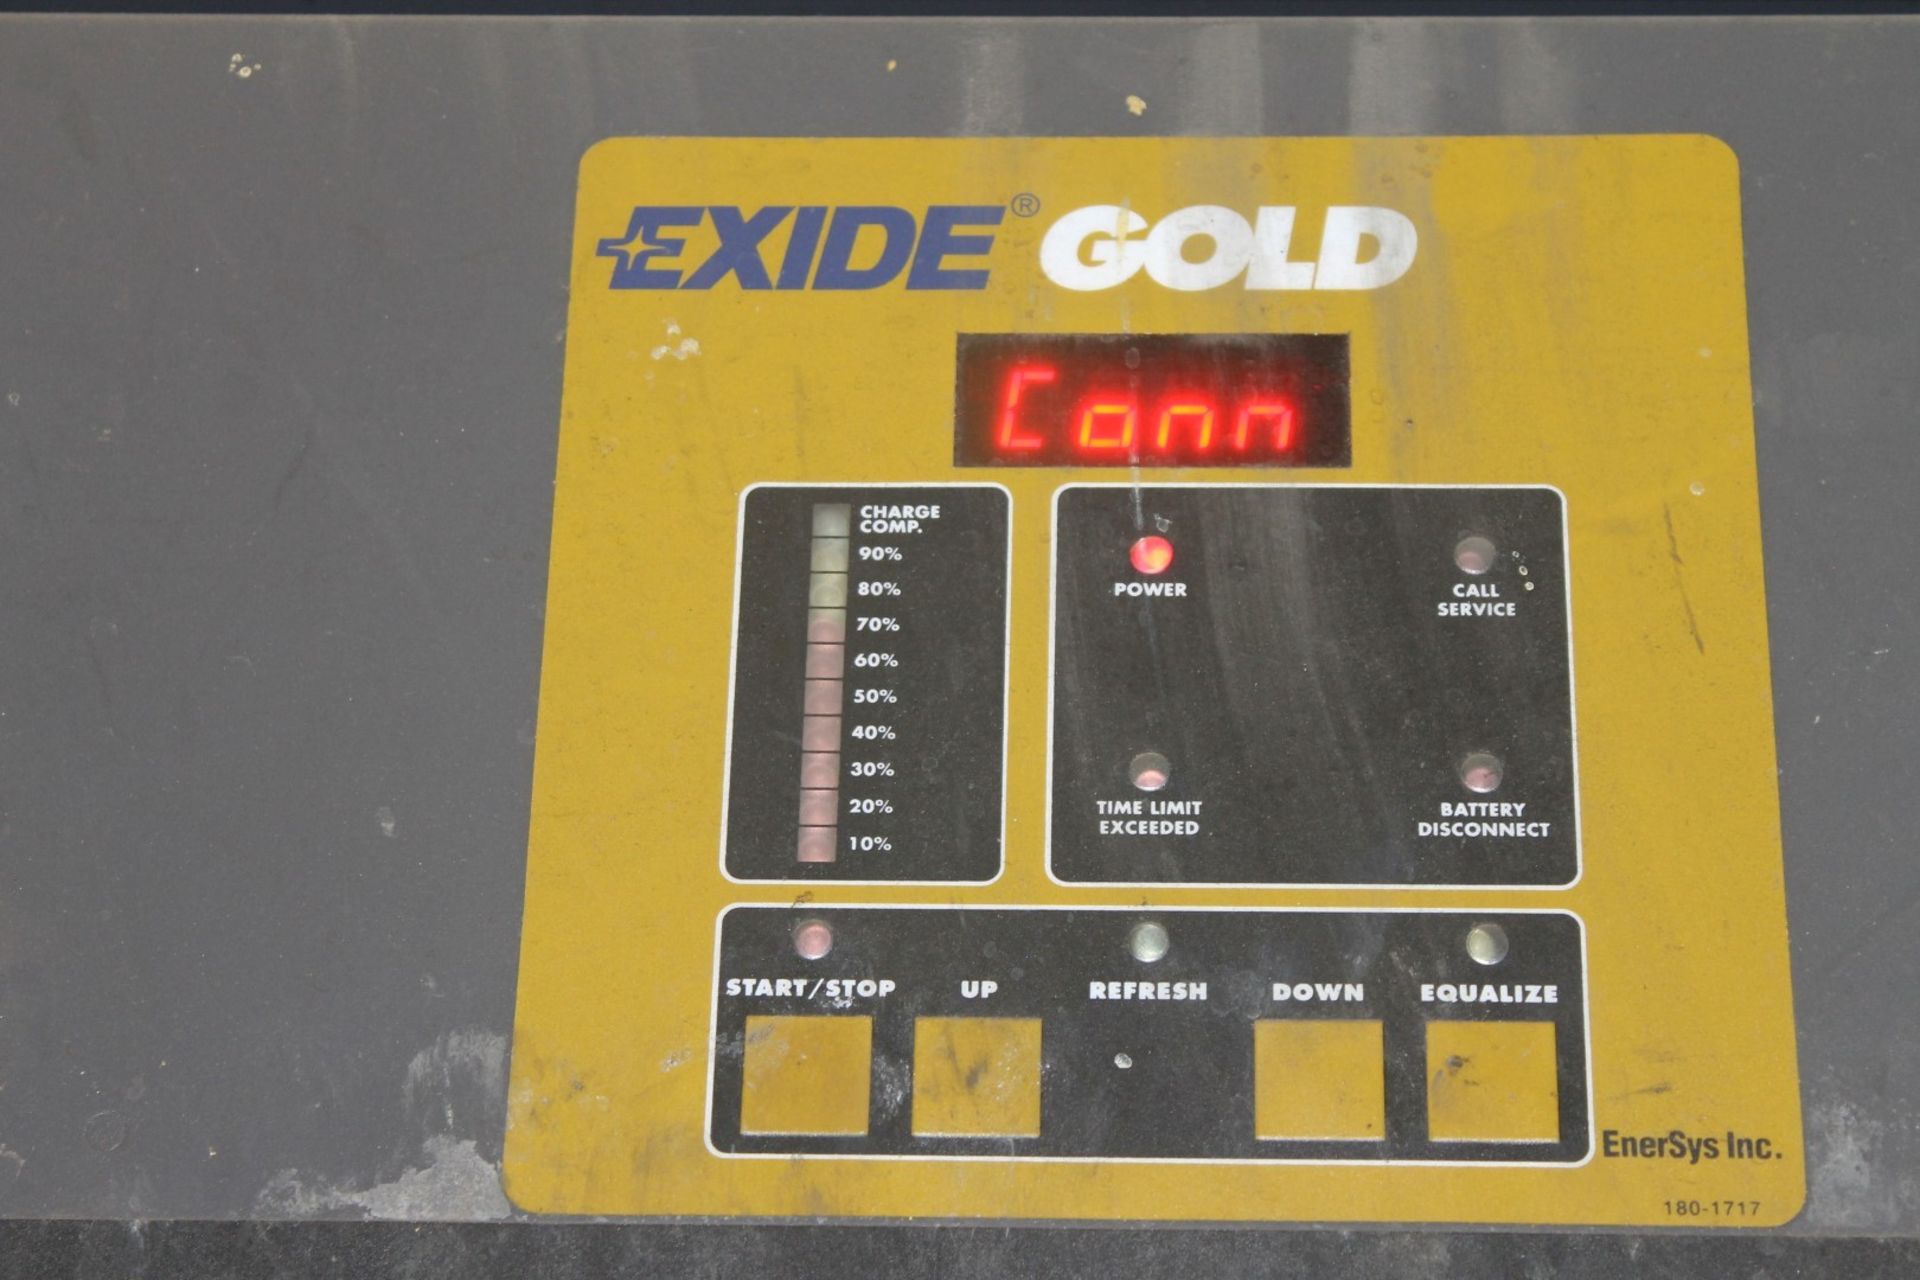 EXIDE GOLD 36 VOLTS INDUSTRIAL BATTERY CHARGER, CAPACITY 960 AMP HRS, WORKHOG - Image 2 of 3